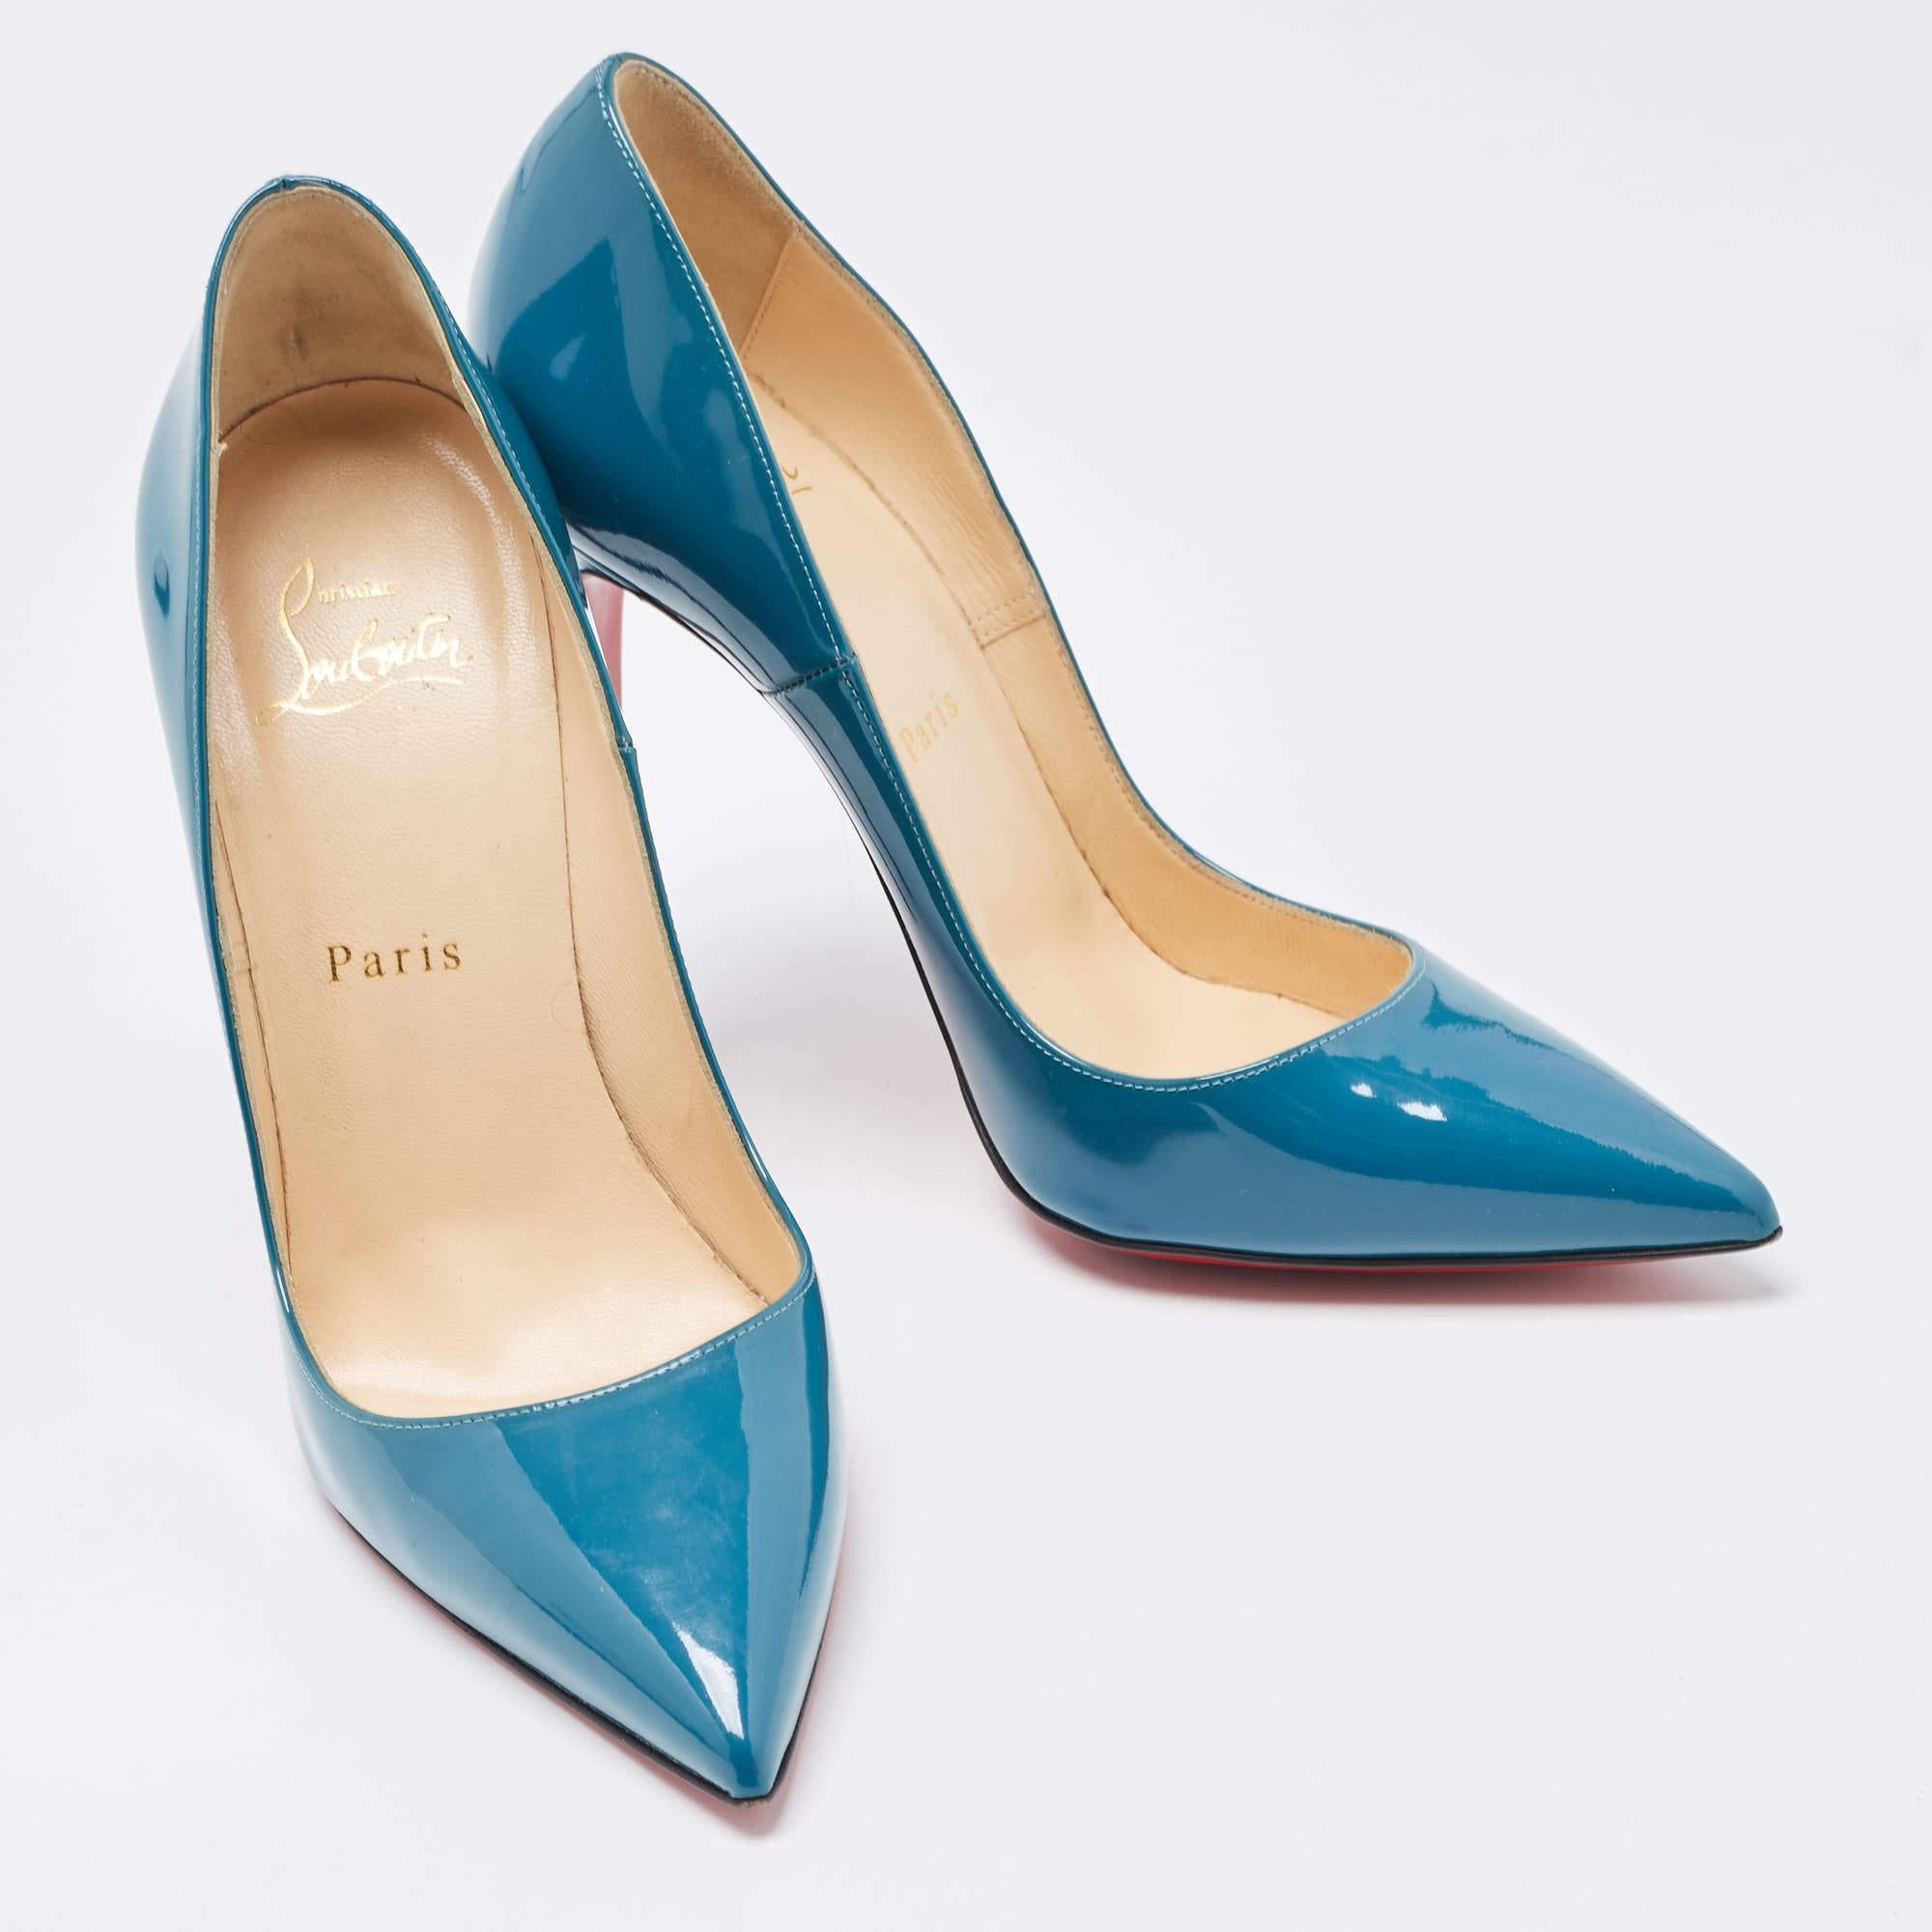 Women's Christian Louboutin Teal Patent Leather So Kate Pumps Size 37.5